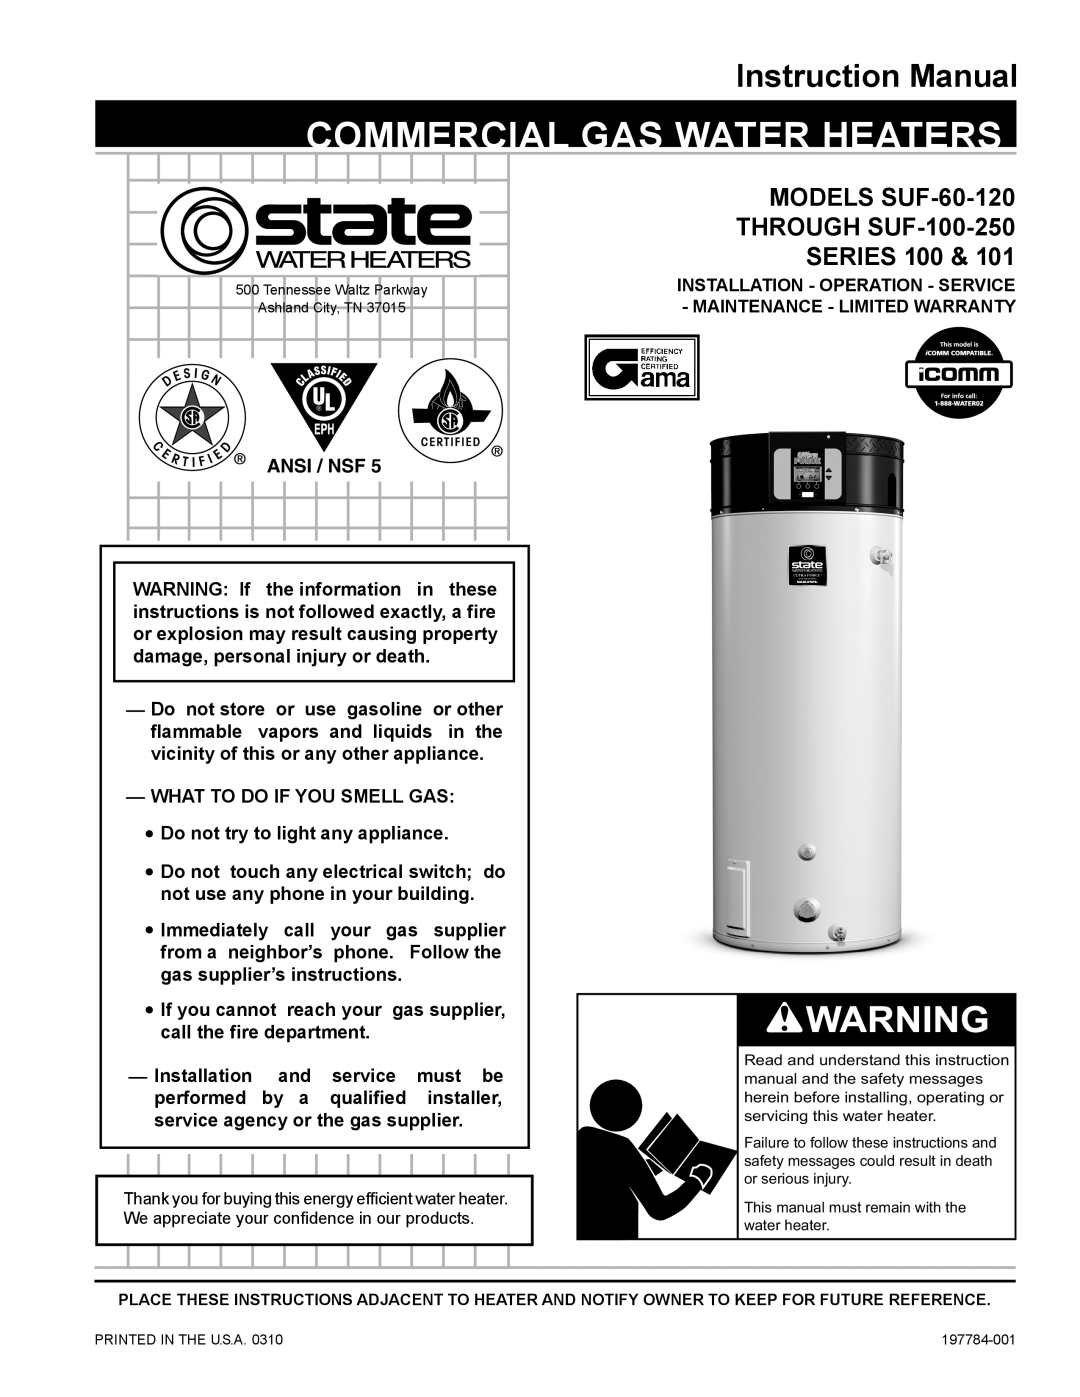 State Industries SUF-100-250, SUF-60-120 instruction manual commercial gas water heaters, Instruction Manual, Ansi / Nsf 